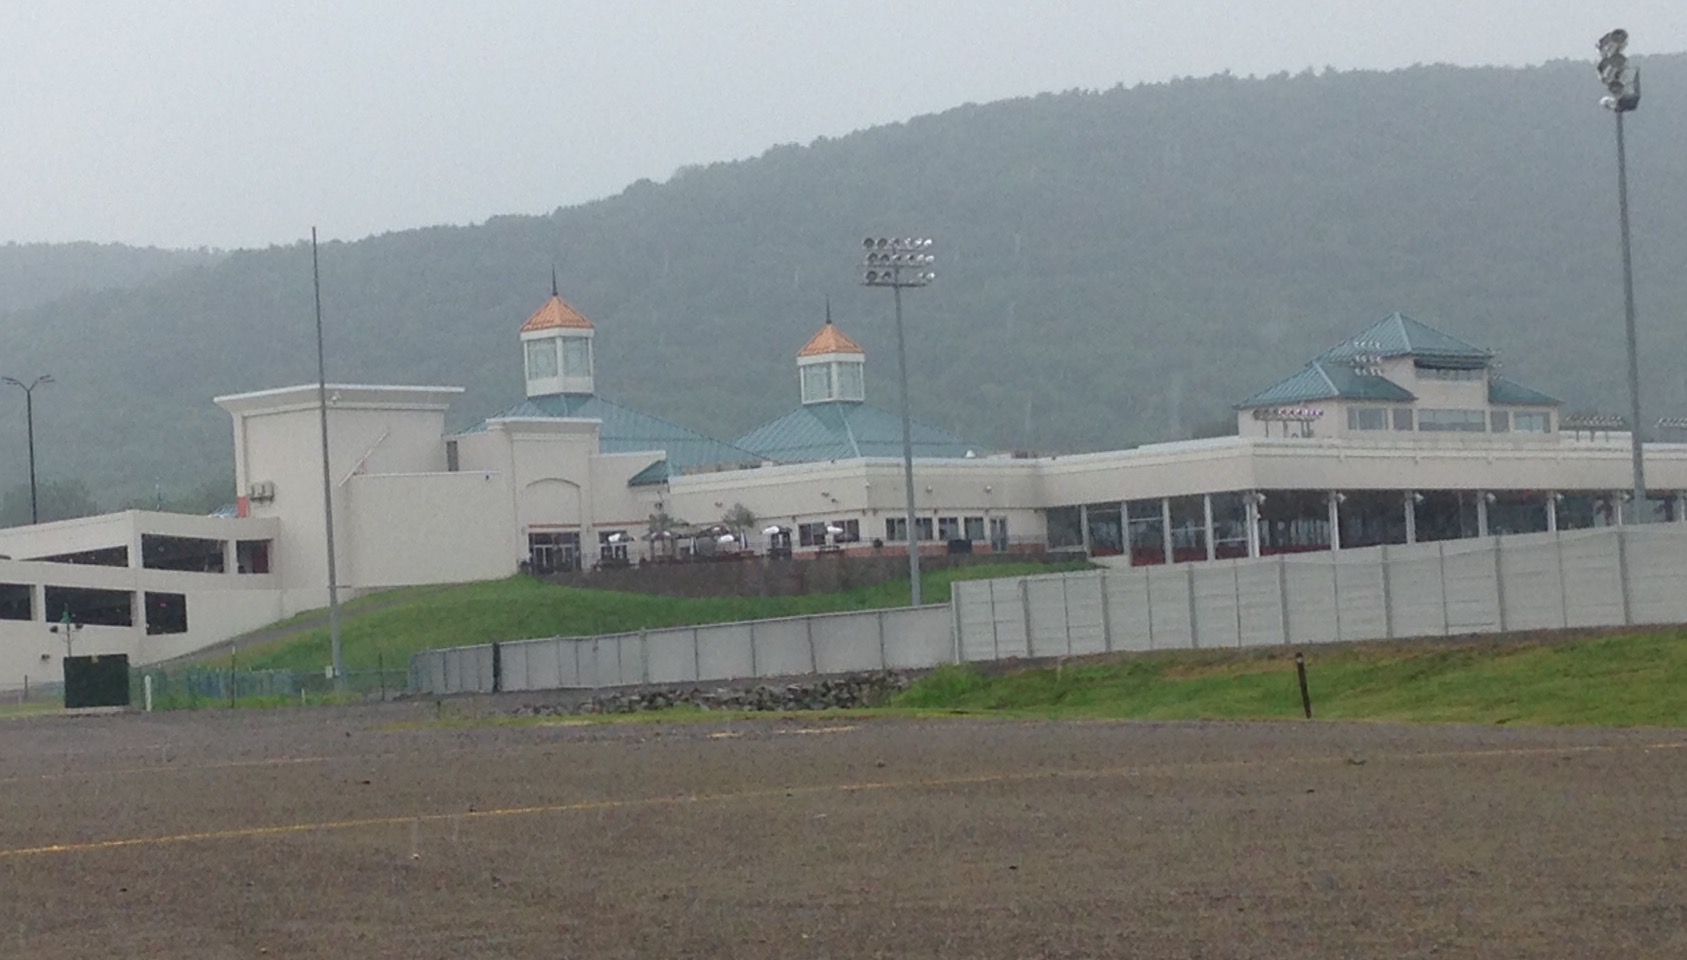 Deadline for fourth gaming license passes; Tioga Downs is only applicant